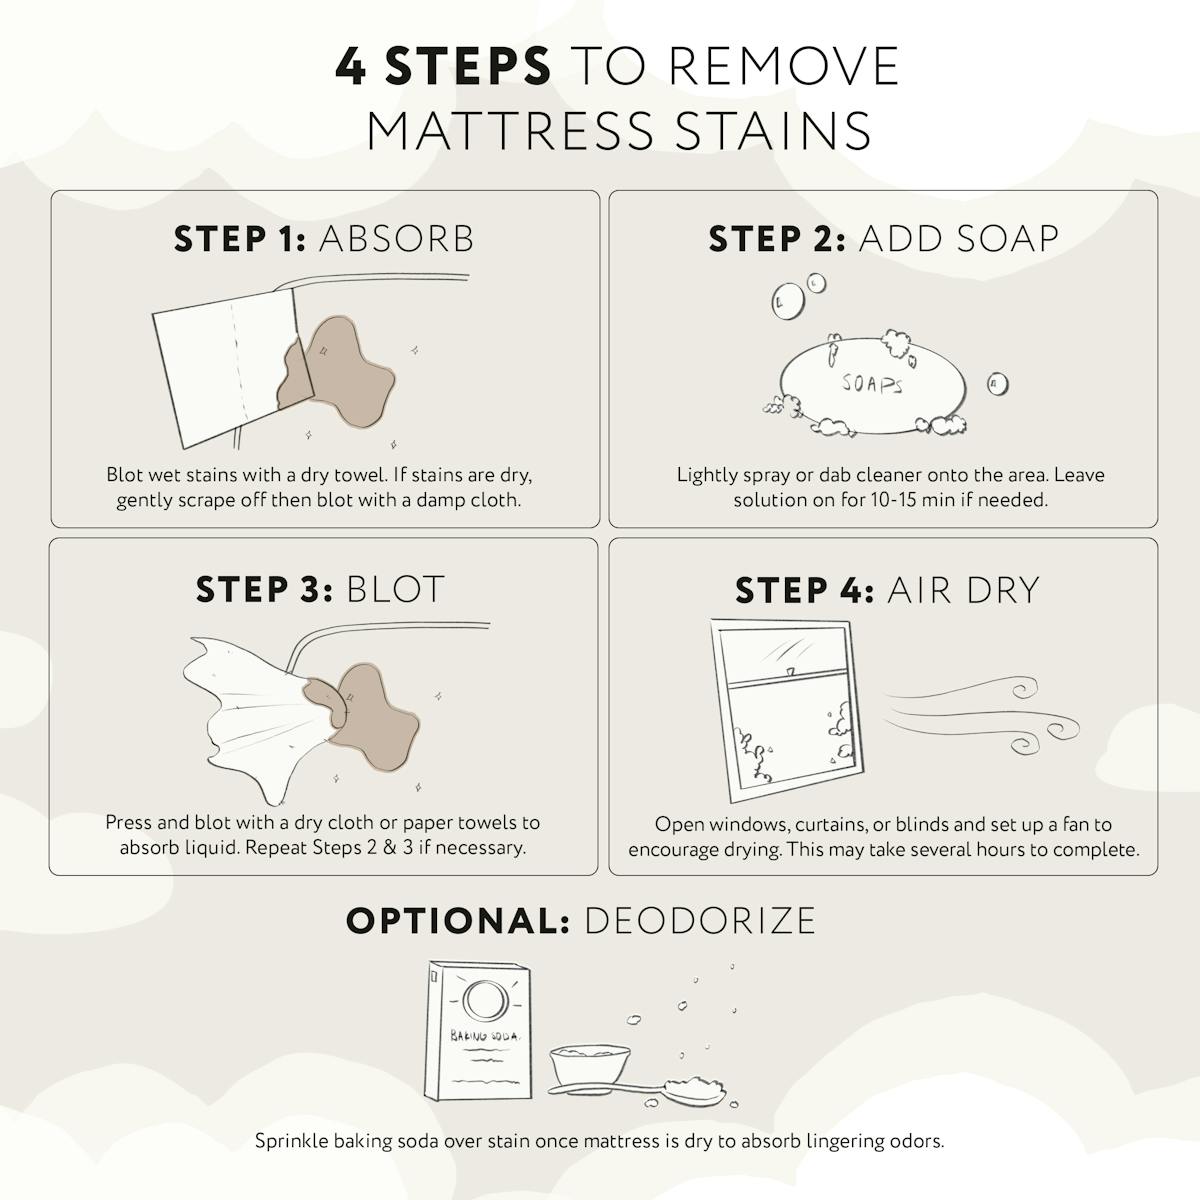 infographic explaining how to get rid of mattress stains